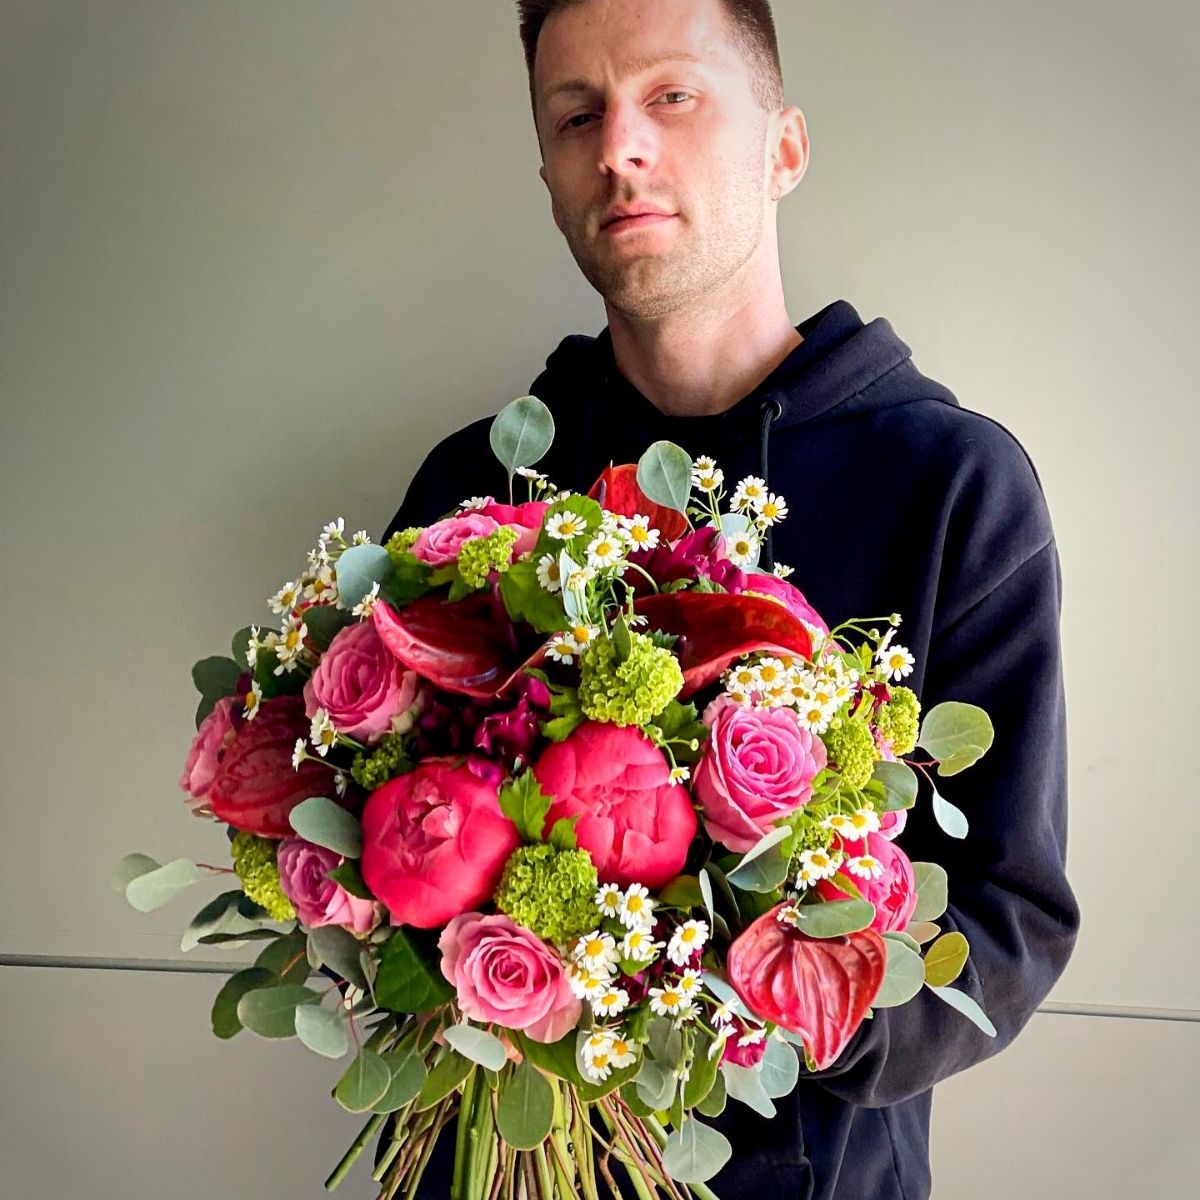 floral-designer-mateusz-wasak-from-poland-showing-his-dianthus-bouquets-featured